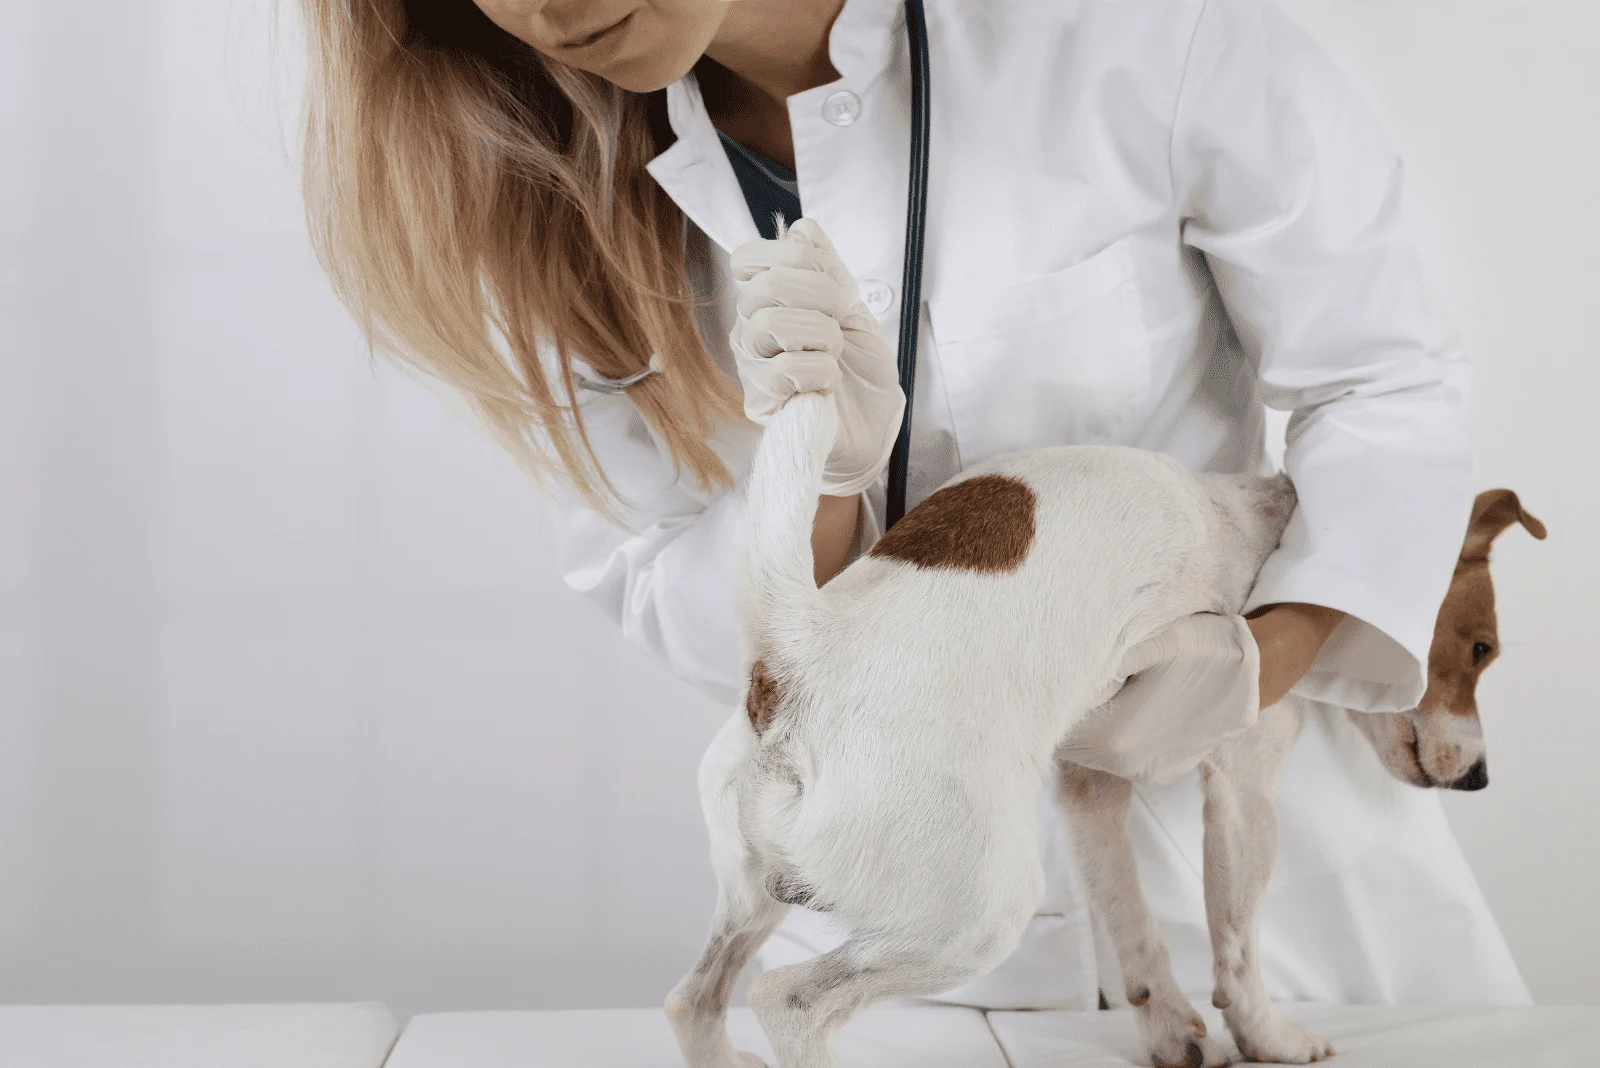 a woman examines a white dog